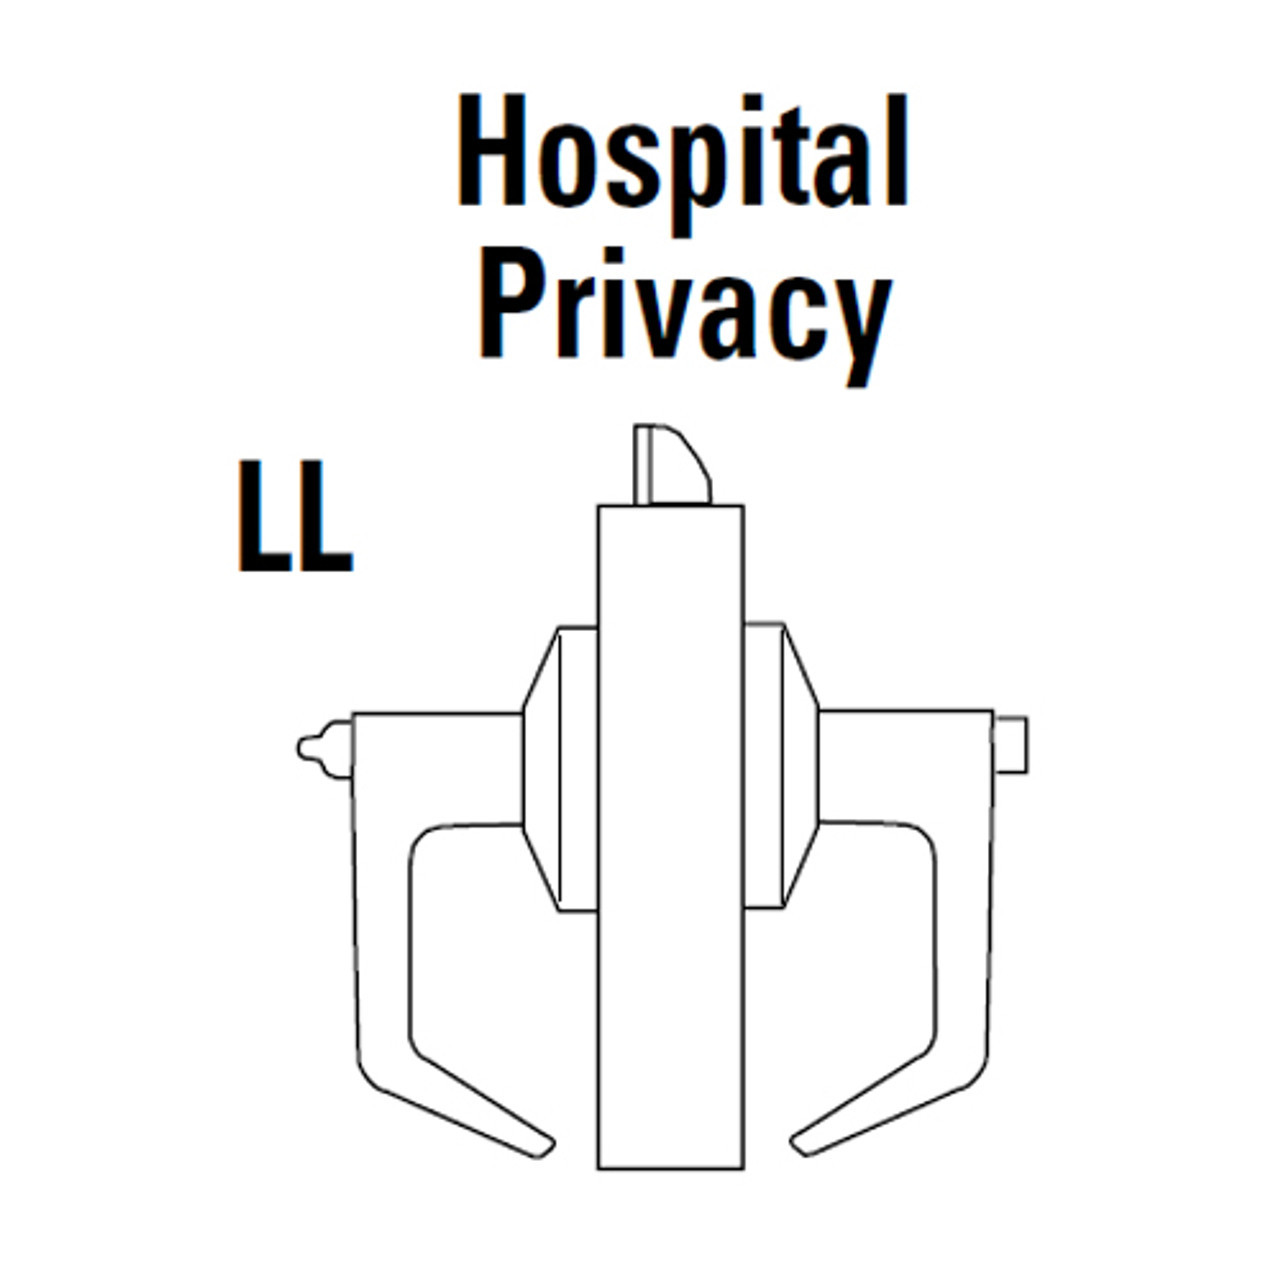 9K30LL14LSTK613LM Best 9K Series Hospital Privacy Heavy Duty Cylindrical Lever Locks in Oil Rubbed Bronze